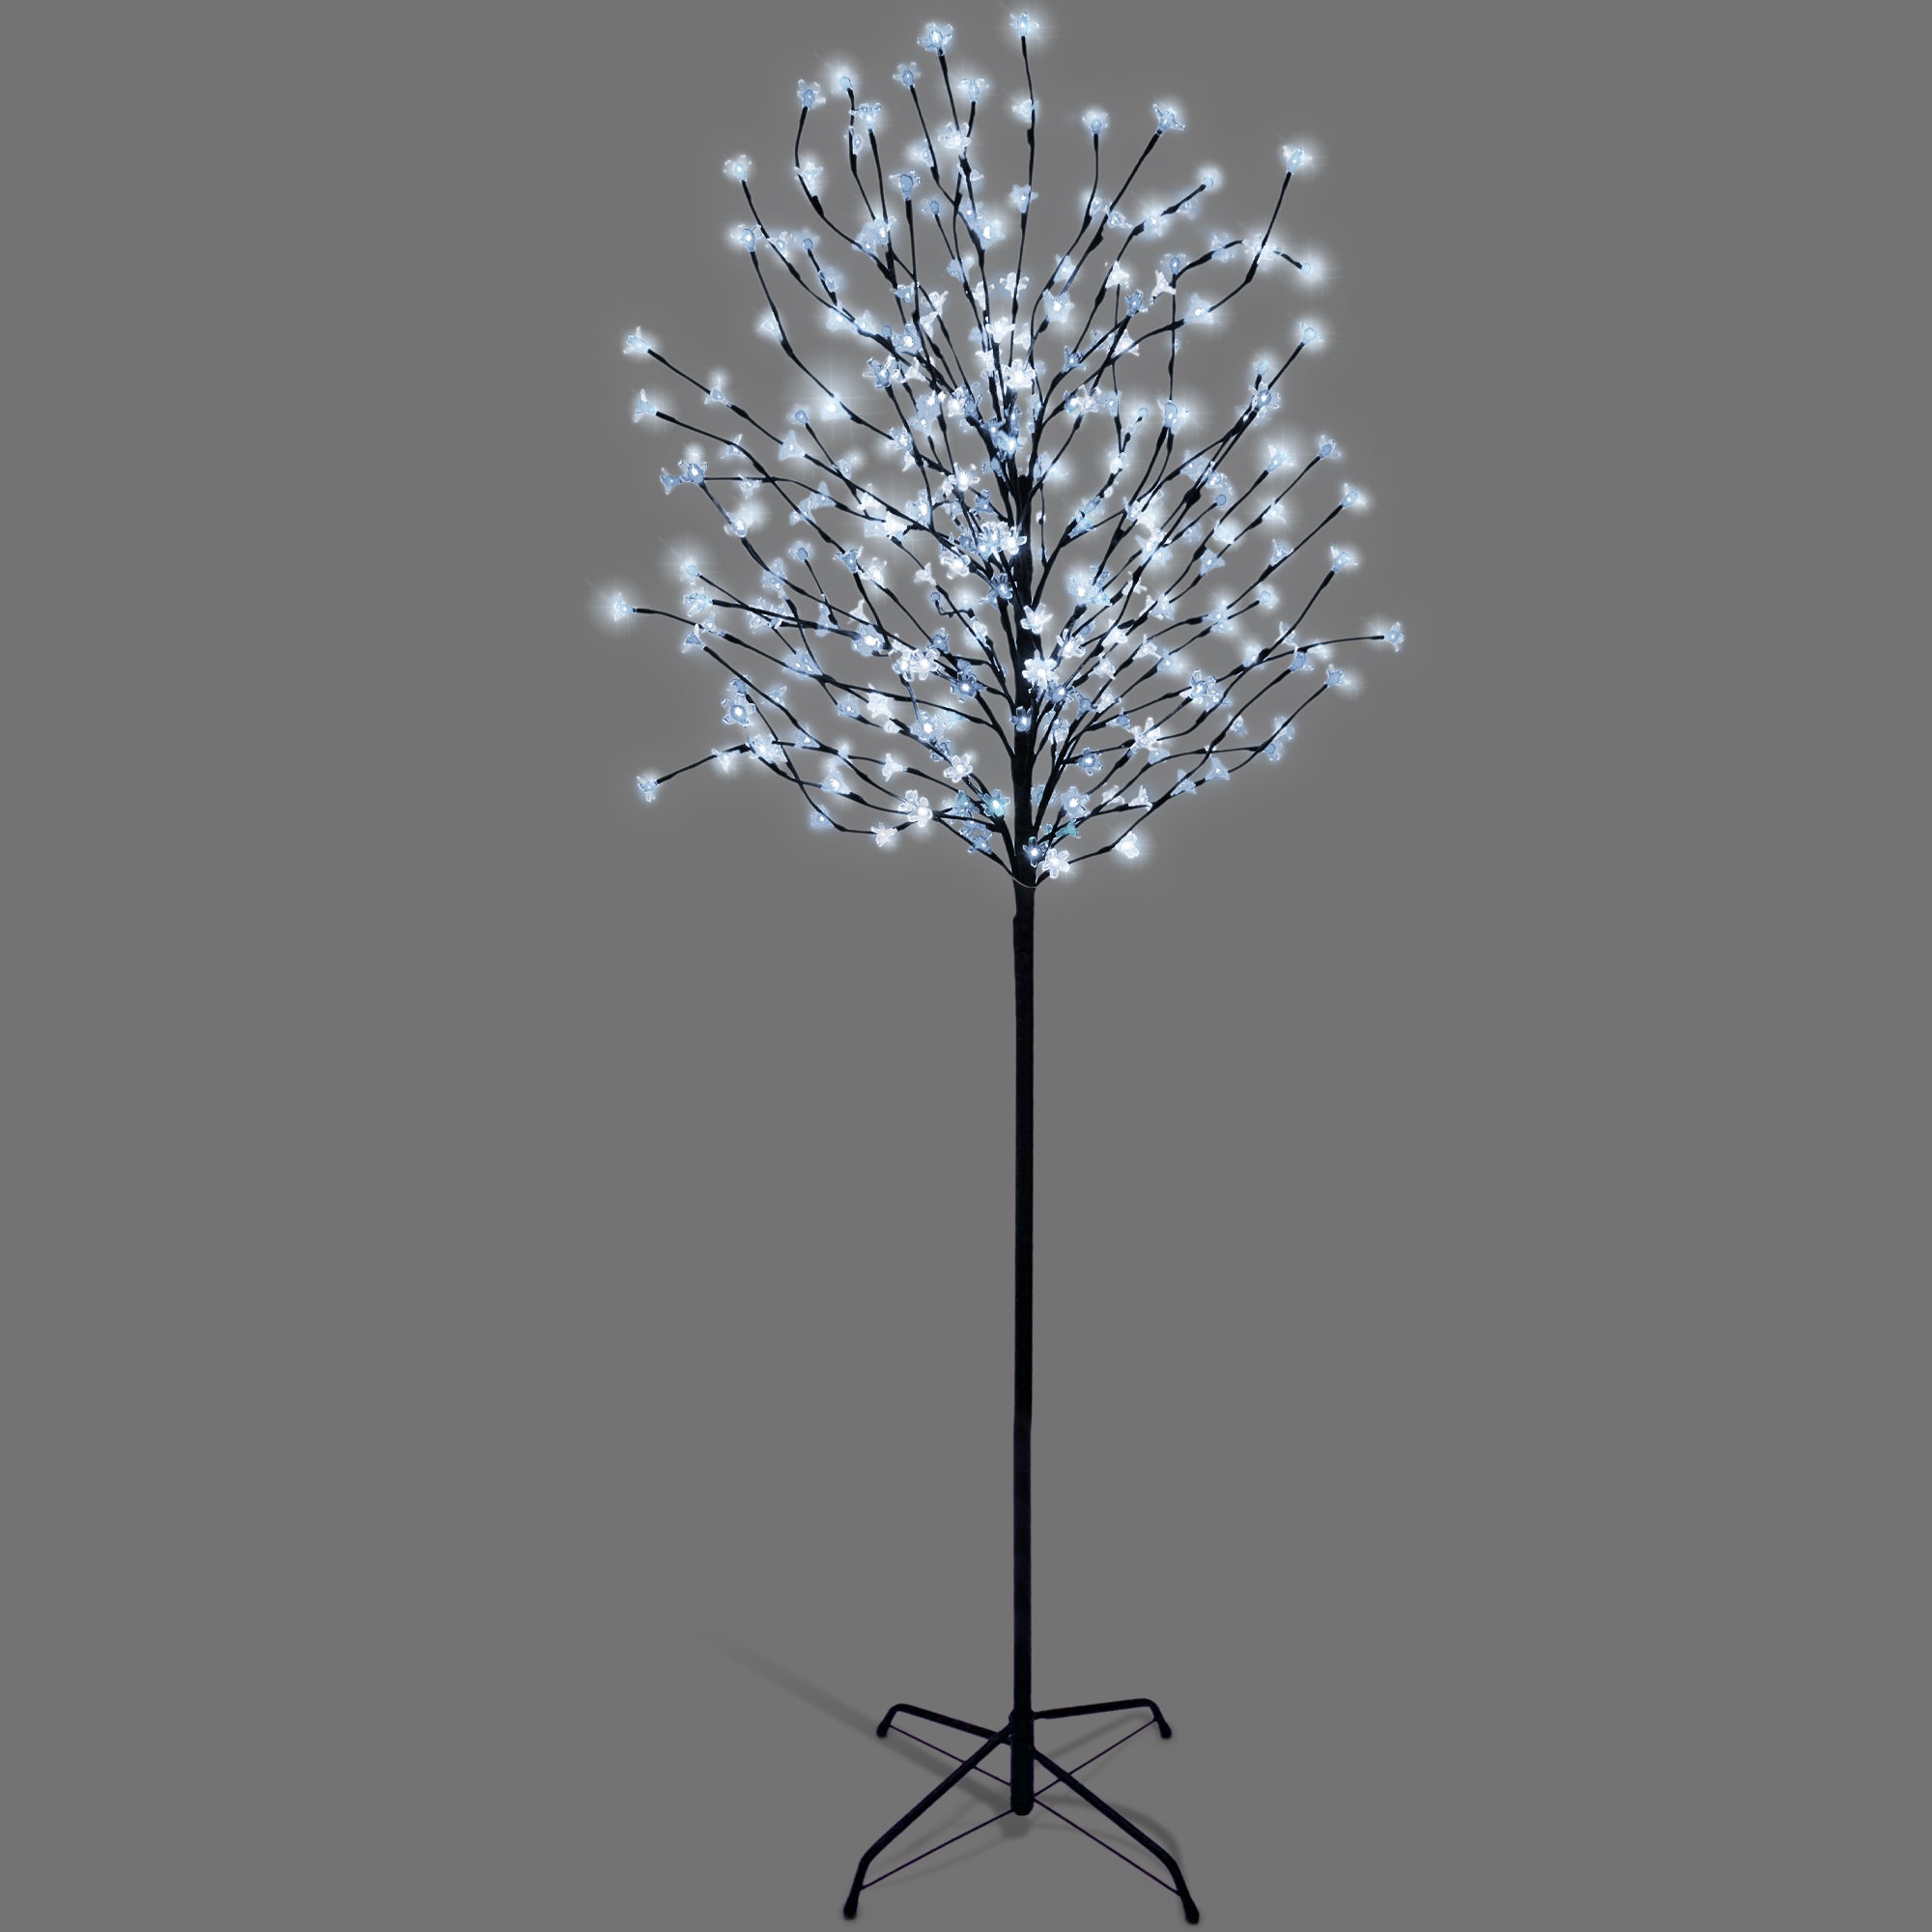 NETTA 7FT LED Cherry Blossom Tree, 350 Pre-Lit Lights, Auto-Off Timer and 8 Lighting Modes, 3M Power Cable, Suitable for Indoor and Outdoor Use - Cool White